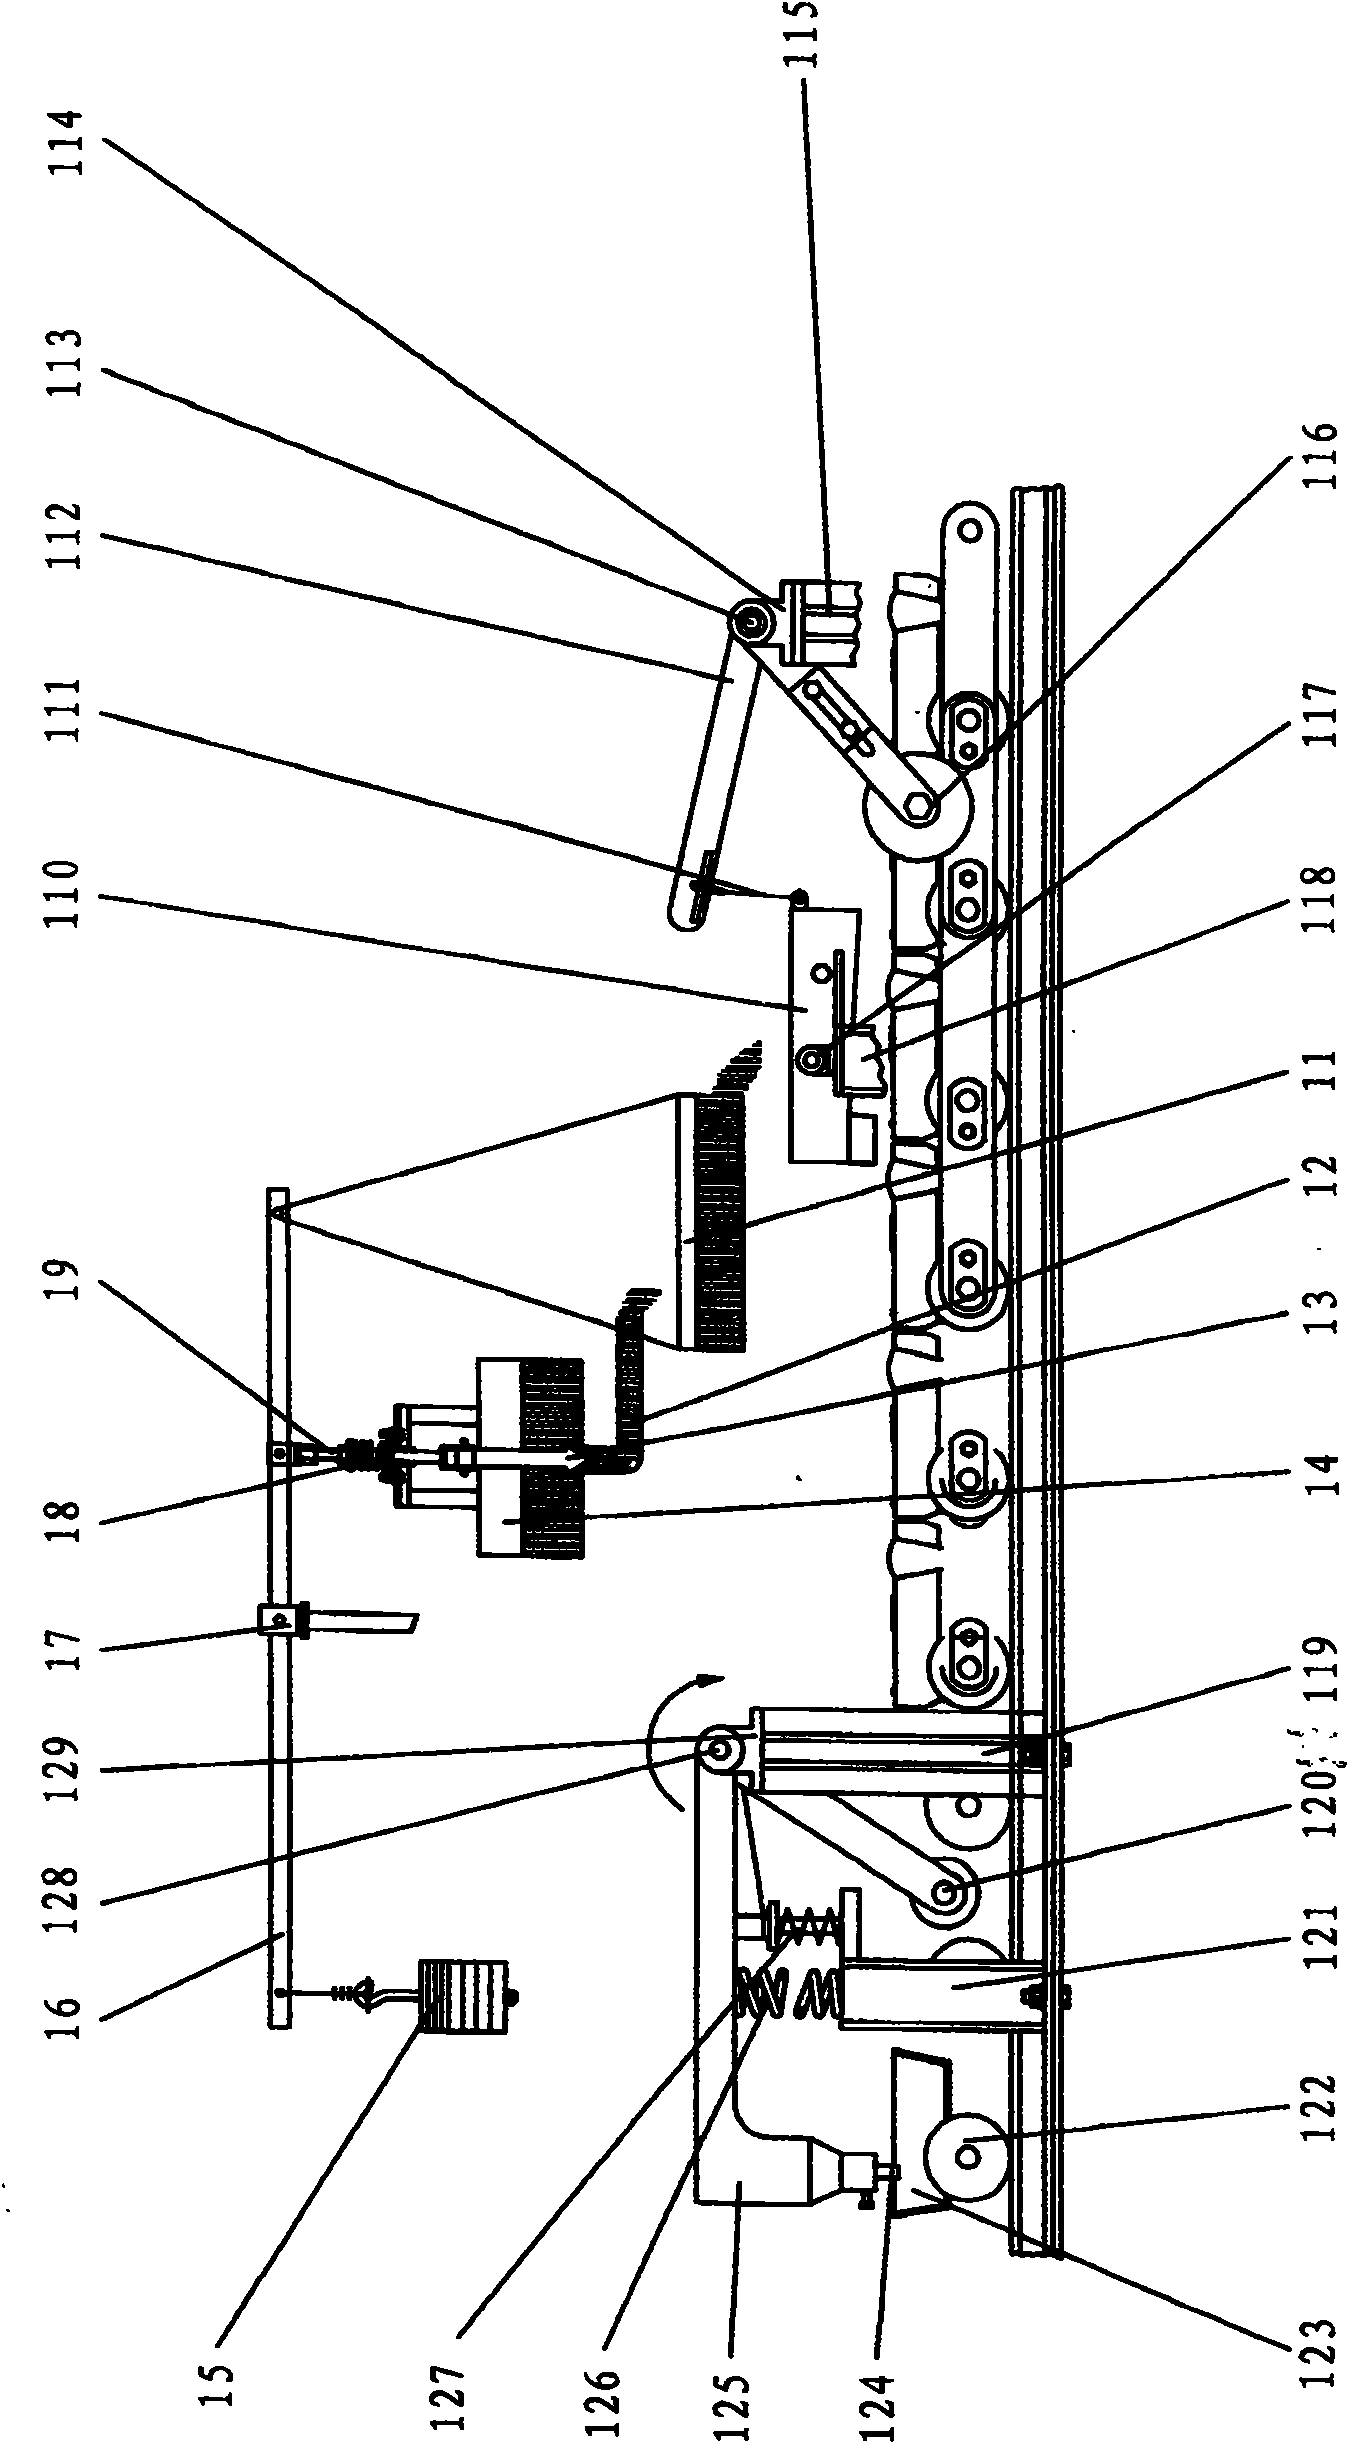 System for automatically producing metal ingot stack